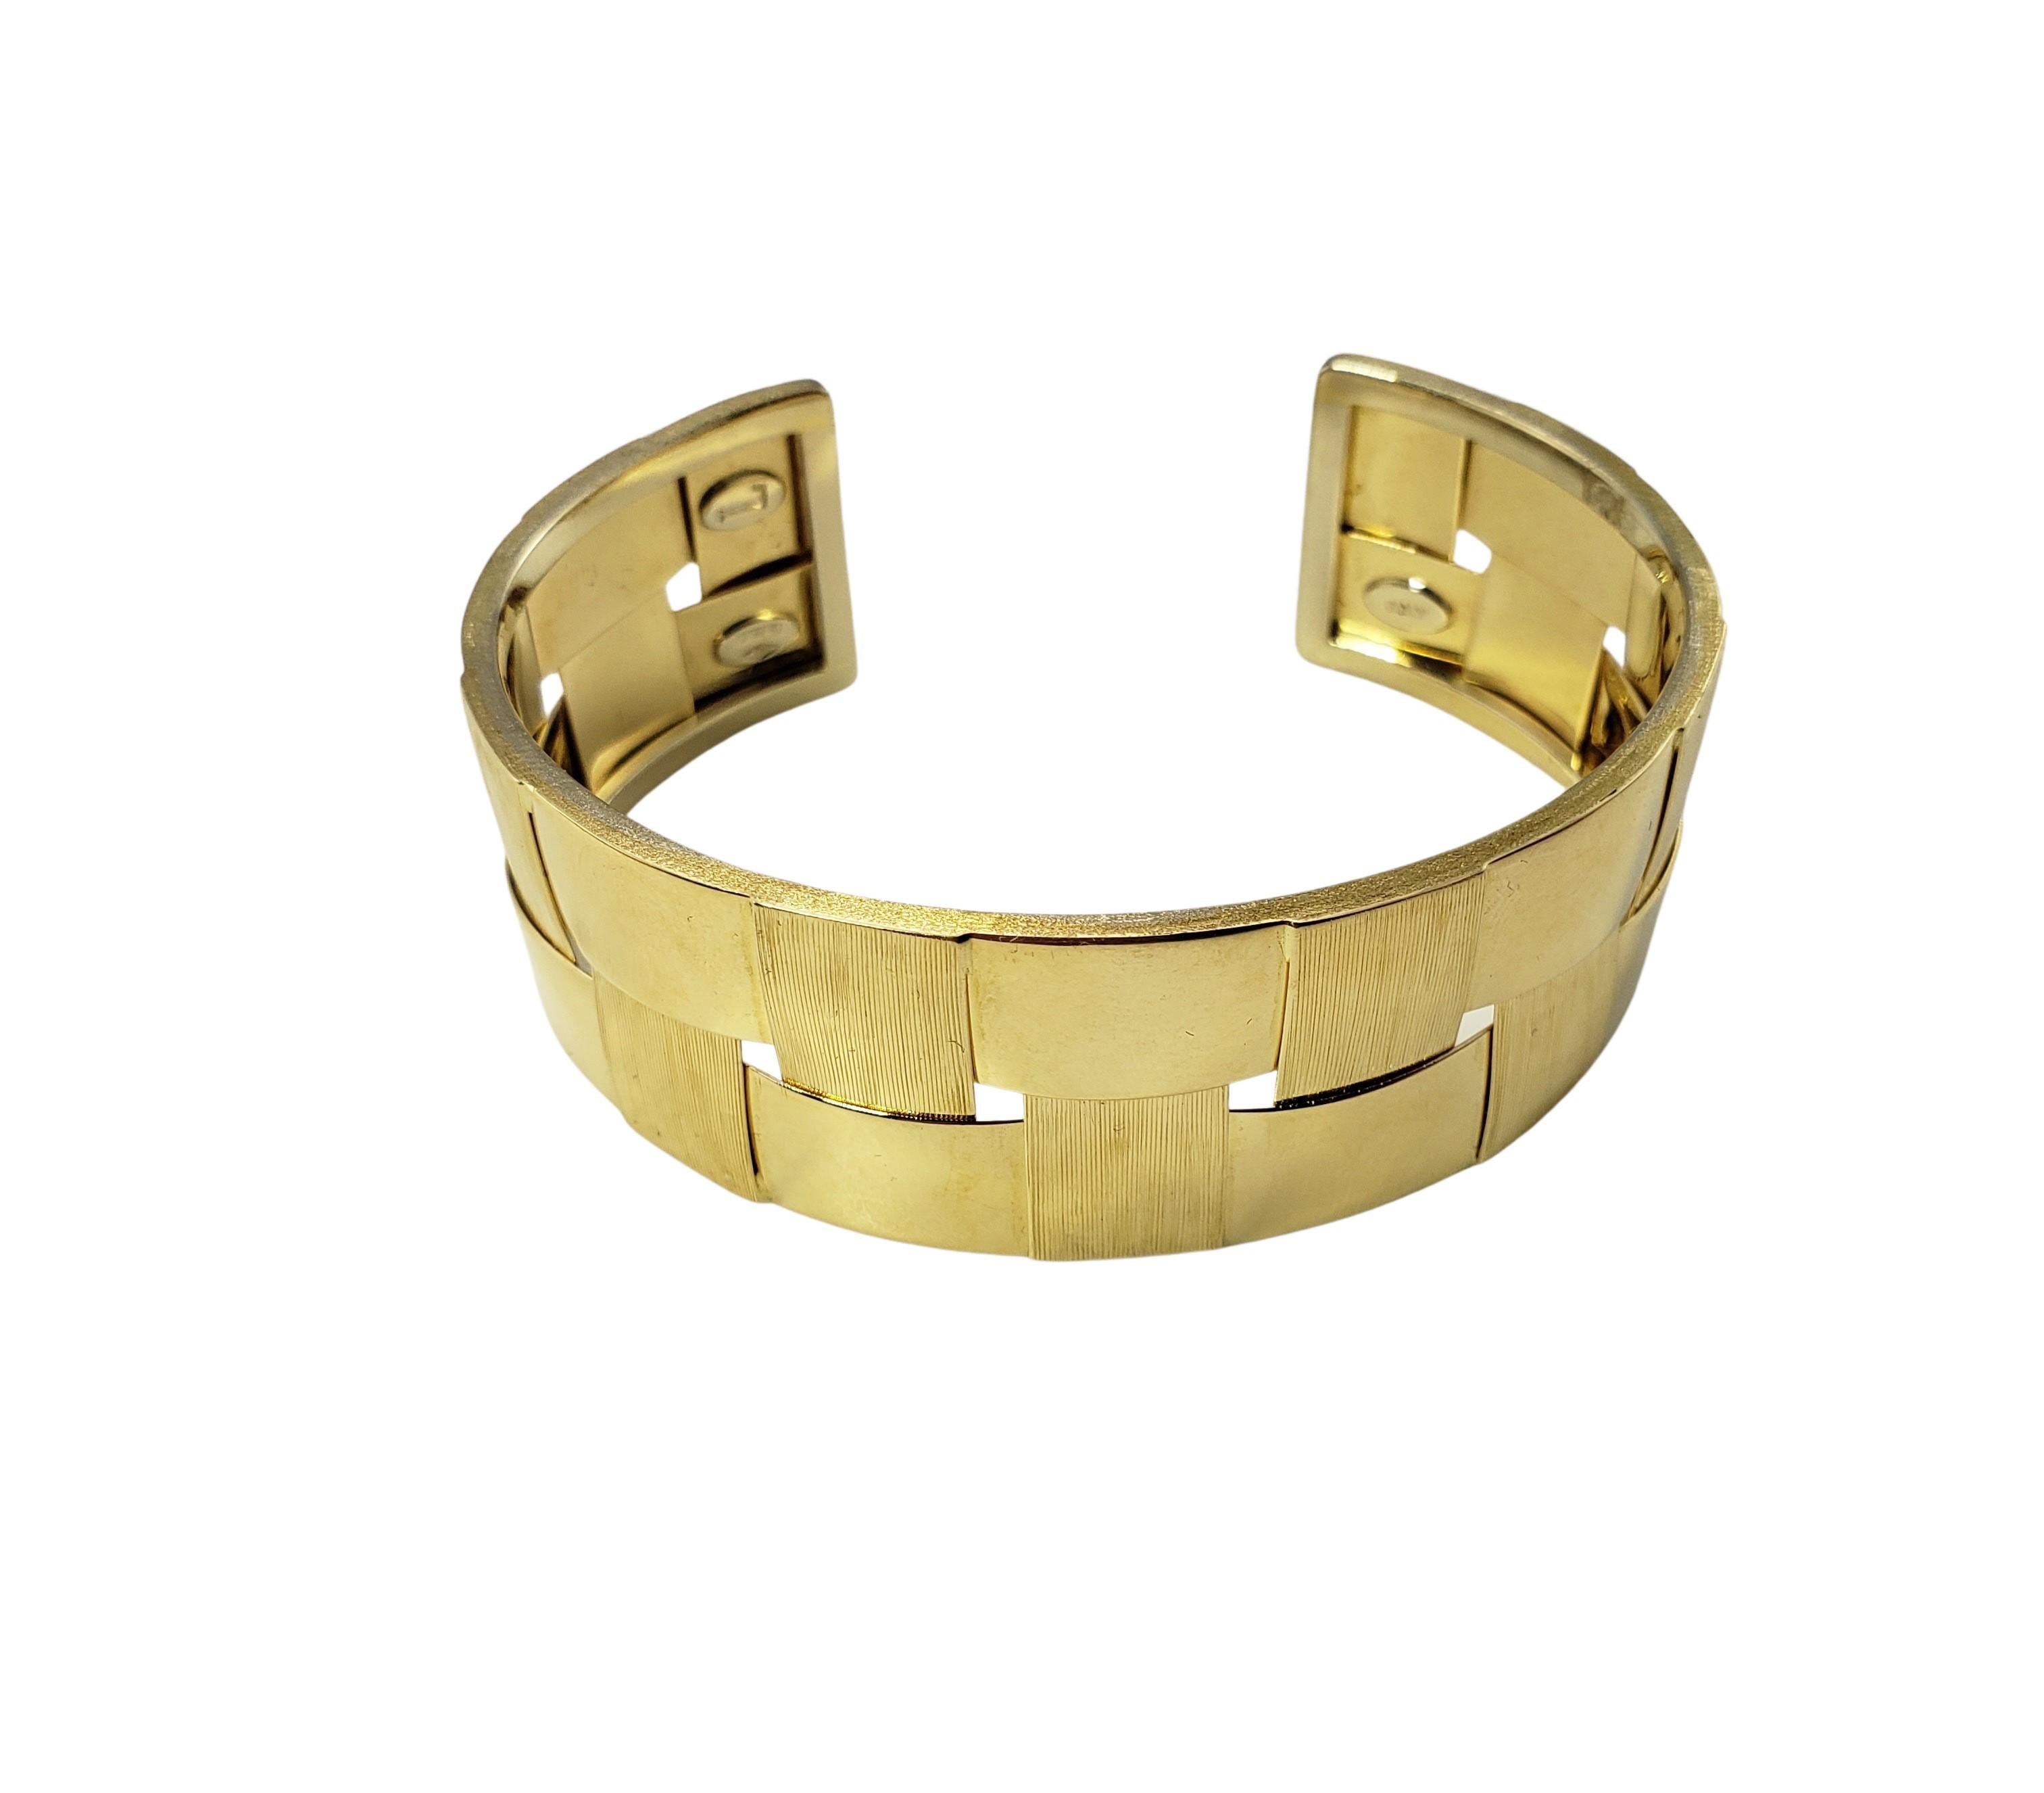 18 Karat Yellow Gold Cuff Bracelet-

This lovely cuff bracelet is crafted in beautifully detailed 18K yellow gold.  Width:  22 mm.  Gap:  27 mm.

Size: 6.5 inches

Weight:  28.2 dwt. / 44.0 gr.

Stamped: 1716  750  L  ITALY

Very good condition,